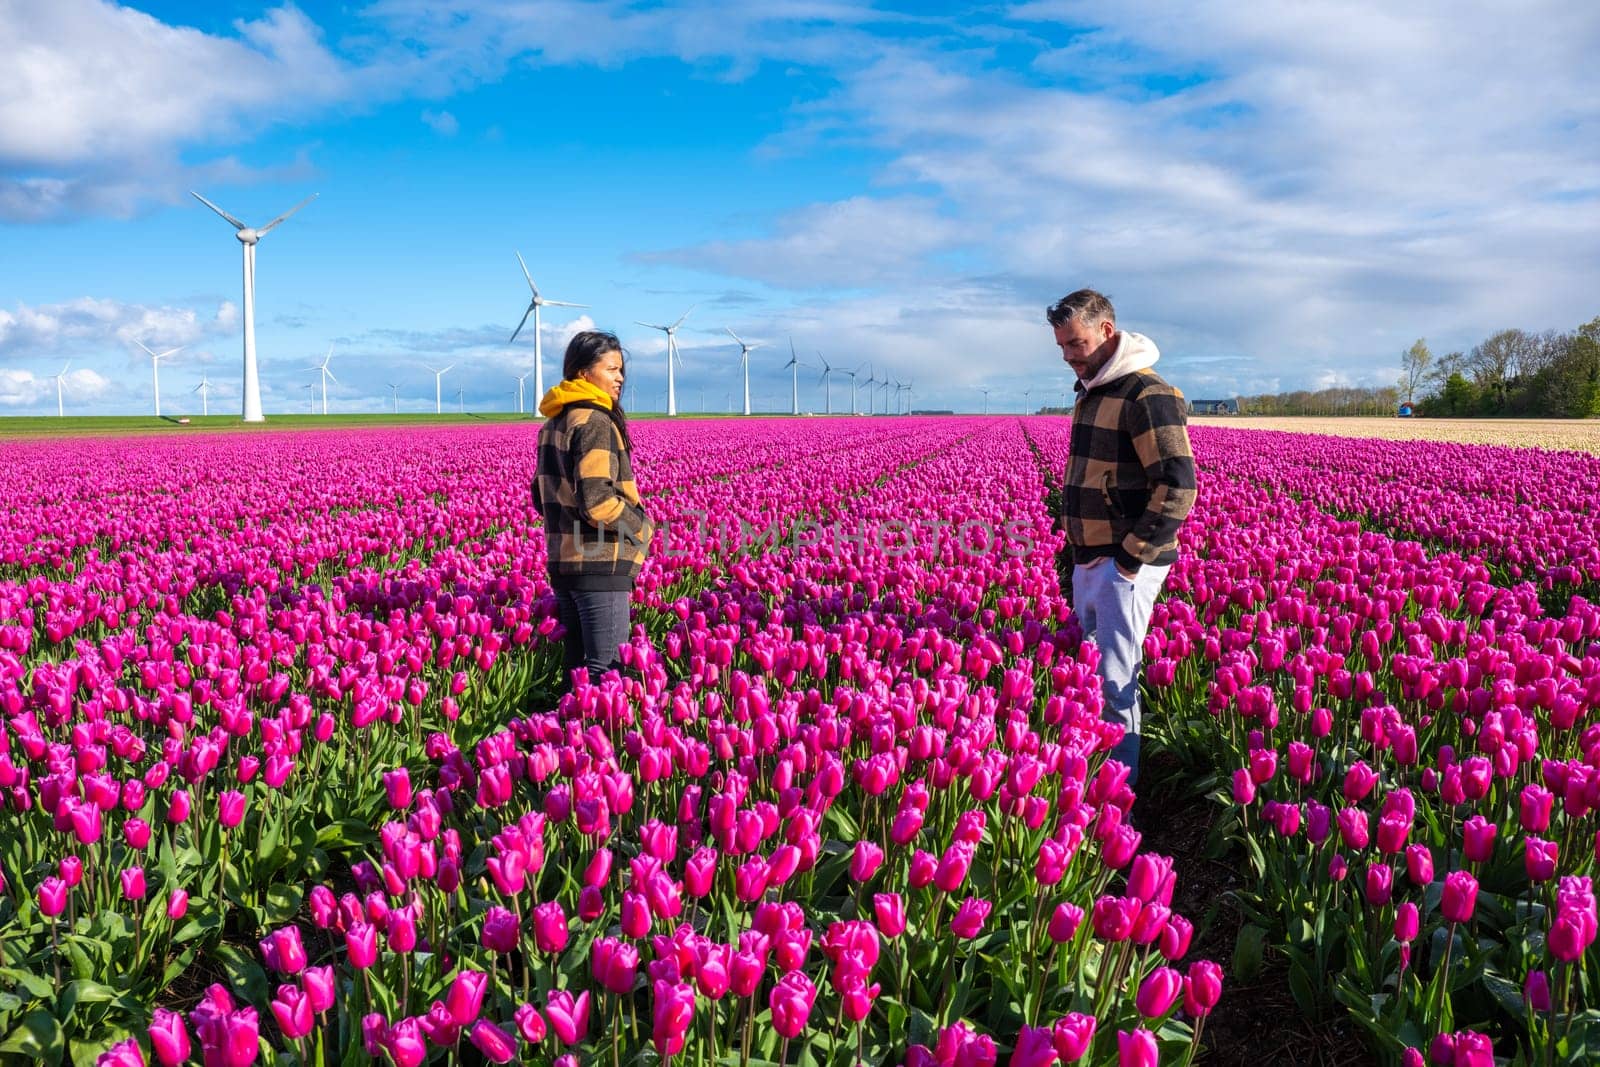 A couple stands gracefully in a vibrant field of purple tulips, surrounded by the beauty of windmill turbines in the Netherlands in Spring by fokkebok